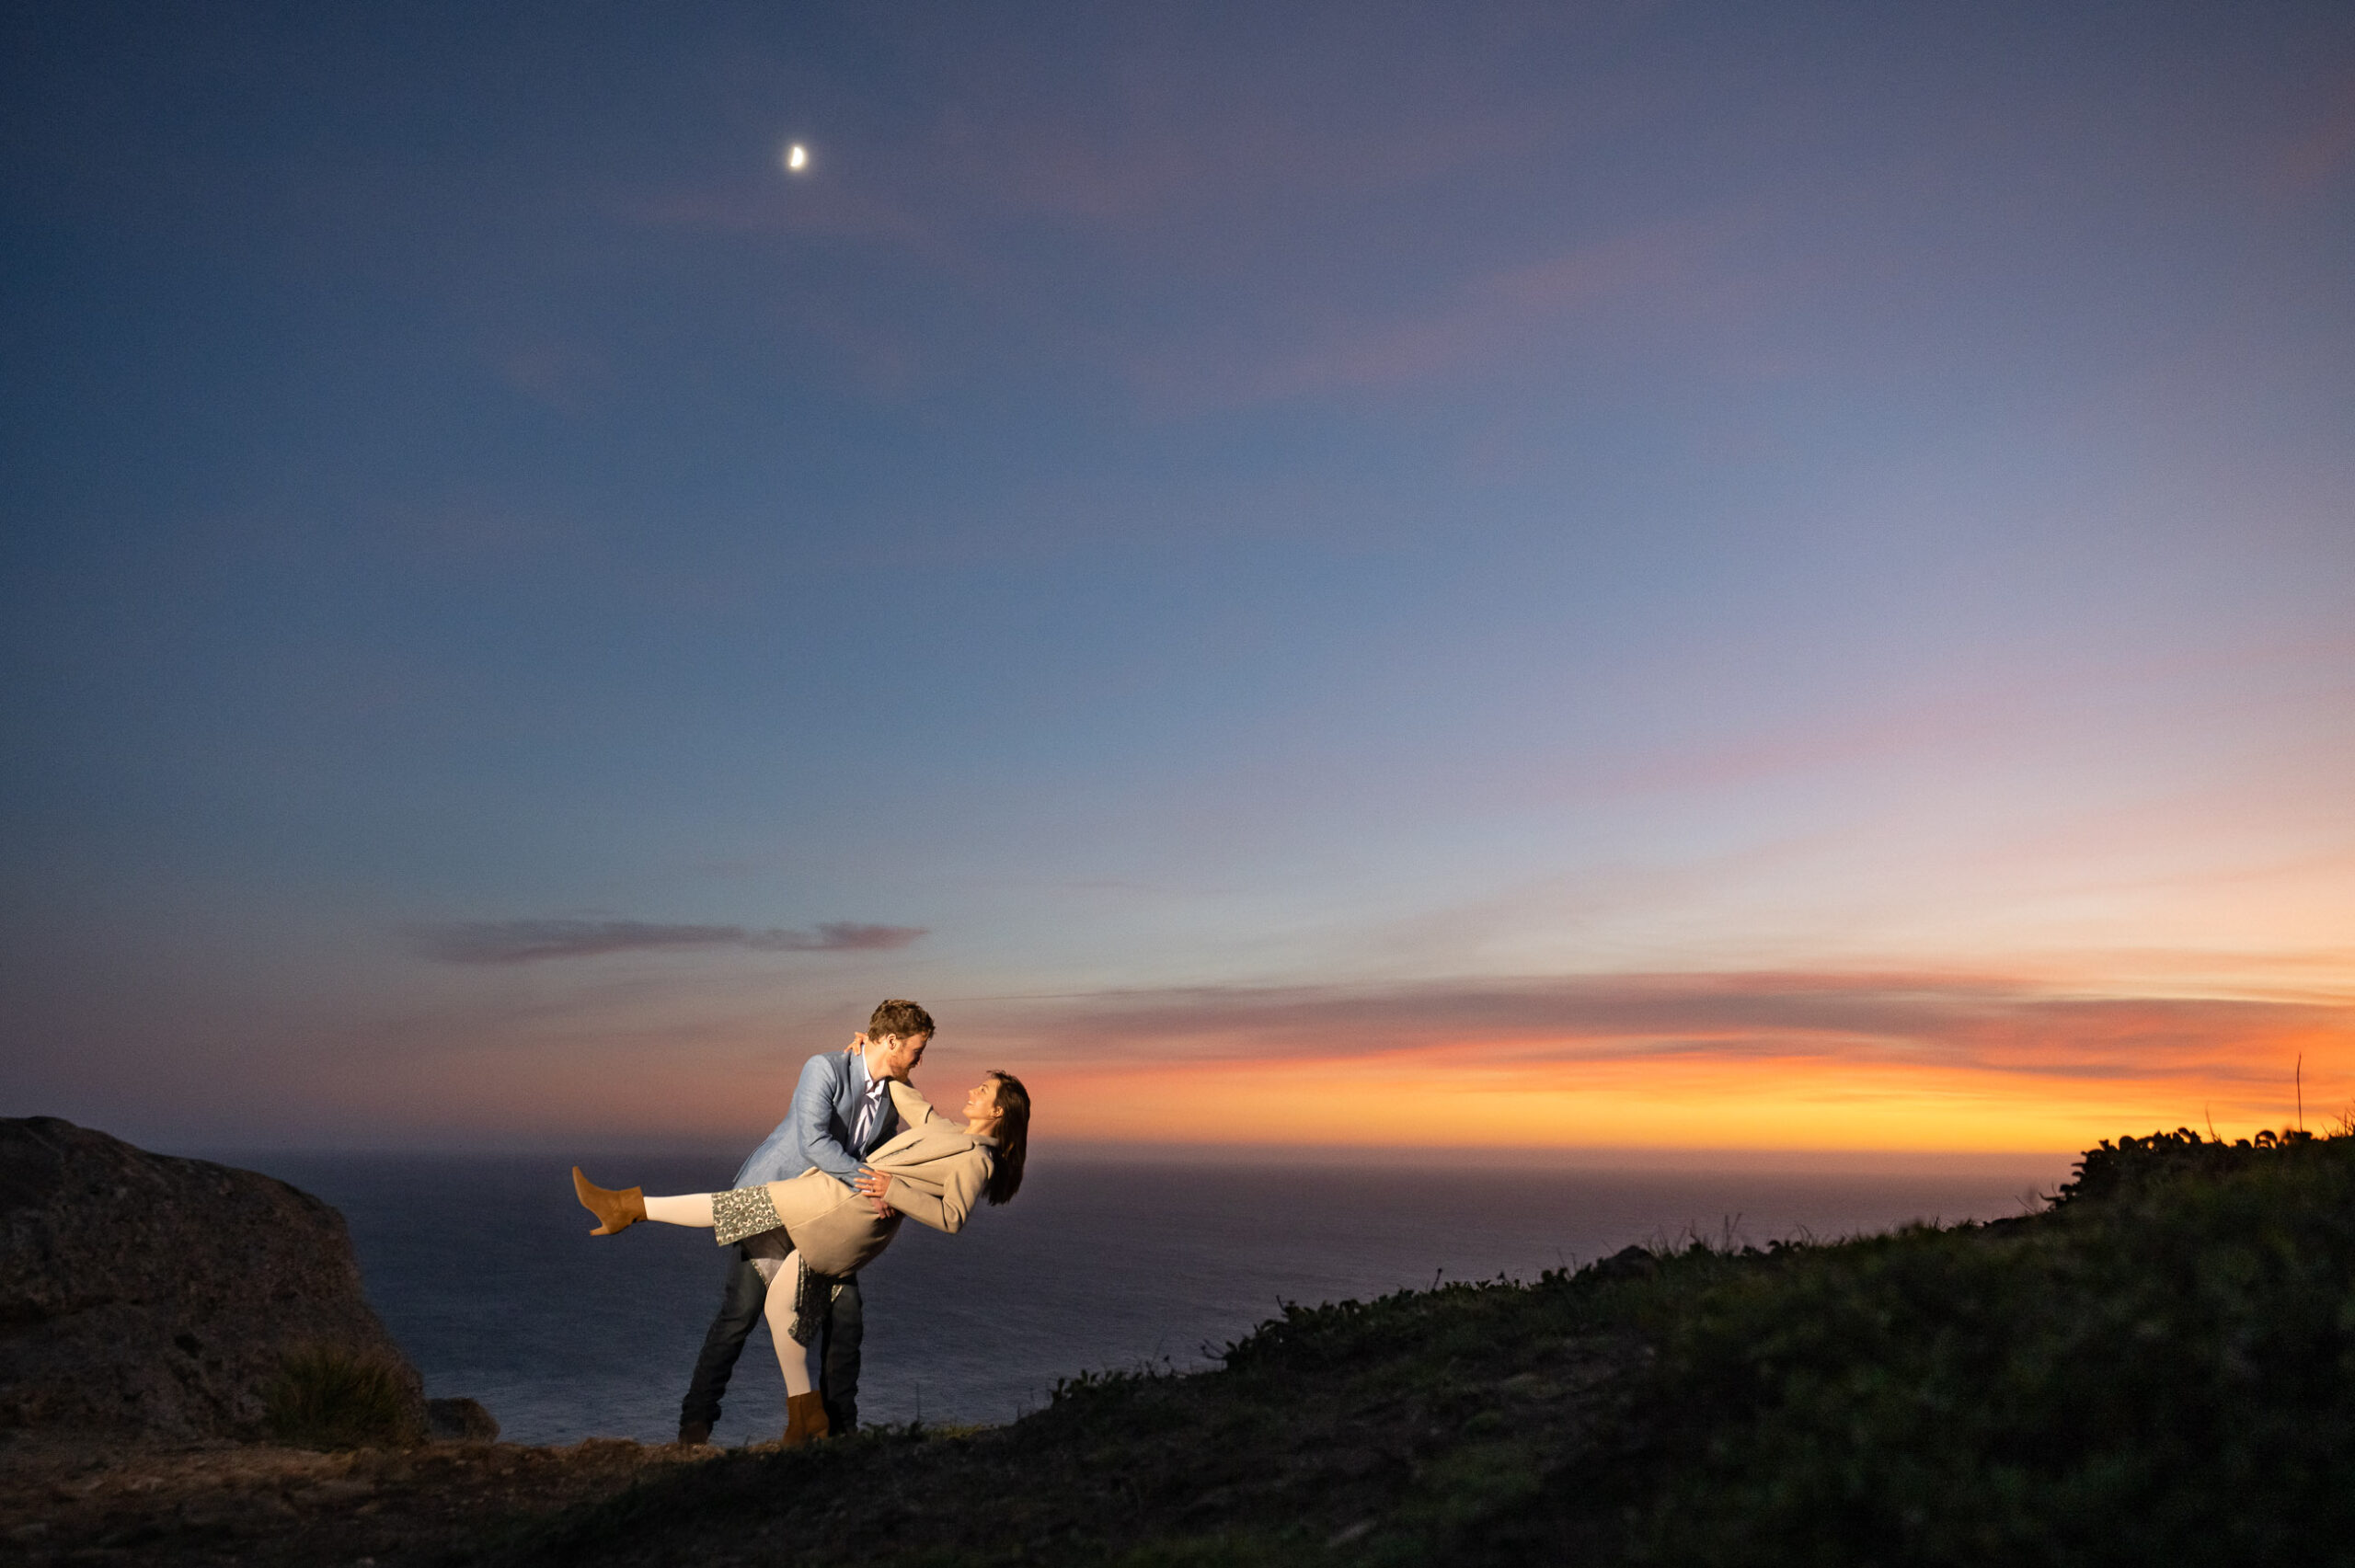 A couple poses at sunset on a cliffside, with the man lifting the woman and the moon visible in the sky above them.